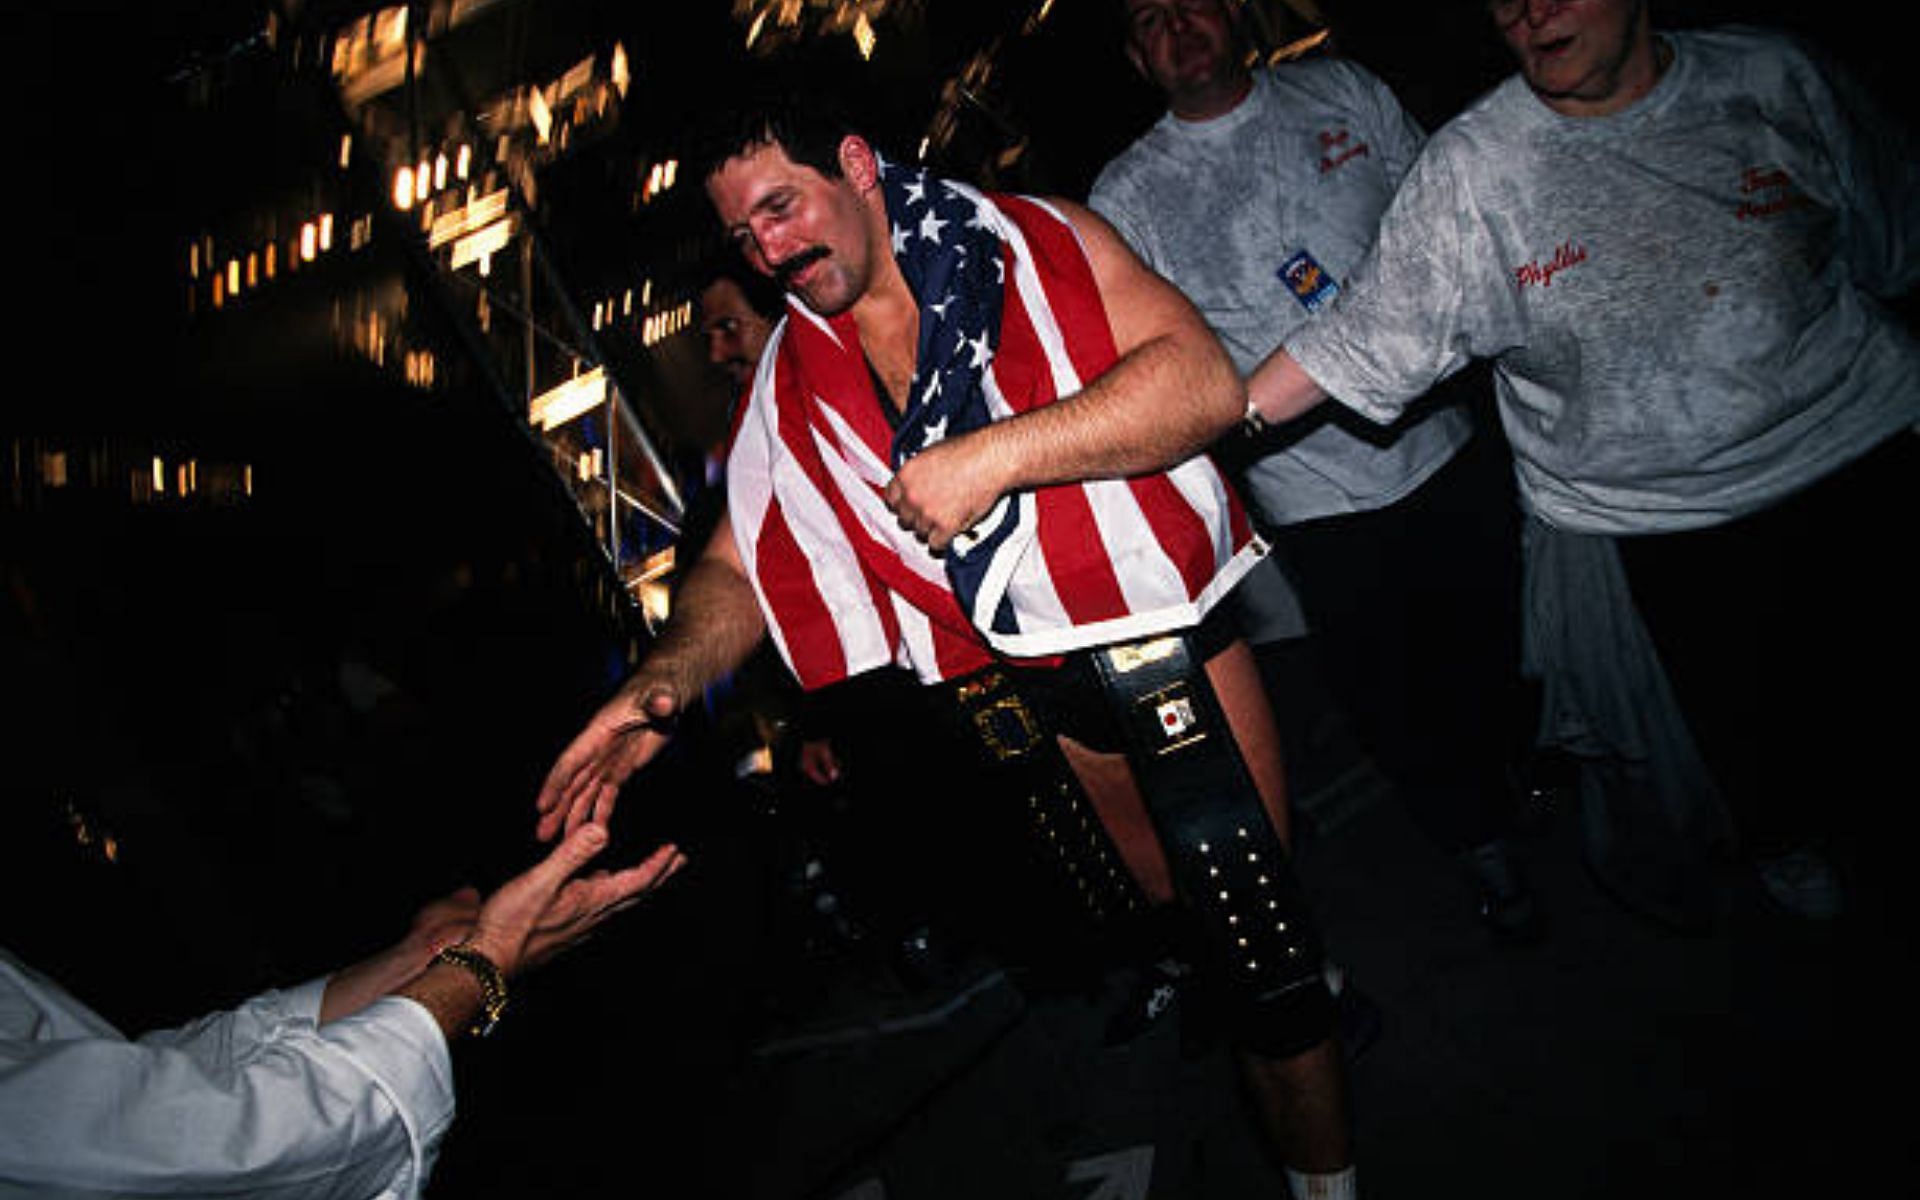 Dan Severn after winning UFC 5 [image courtesy of Evan Hurd/Sygma/Sygma via Getty Images]